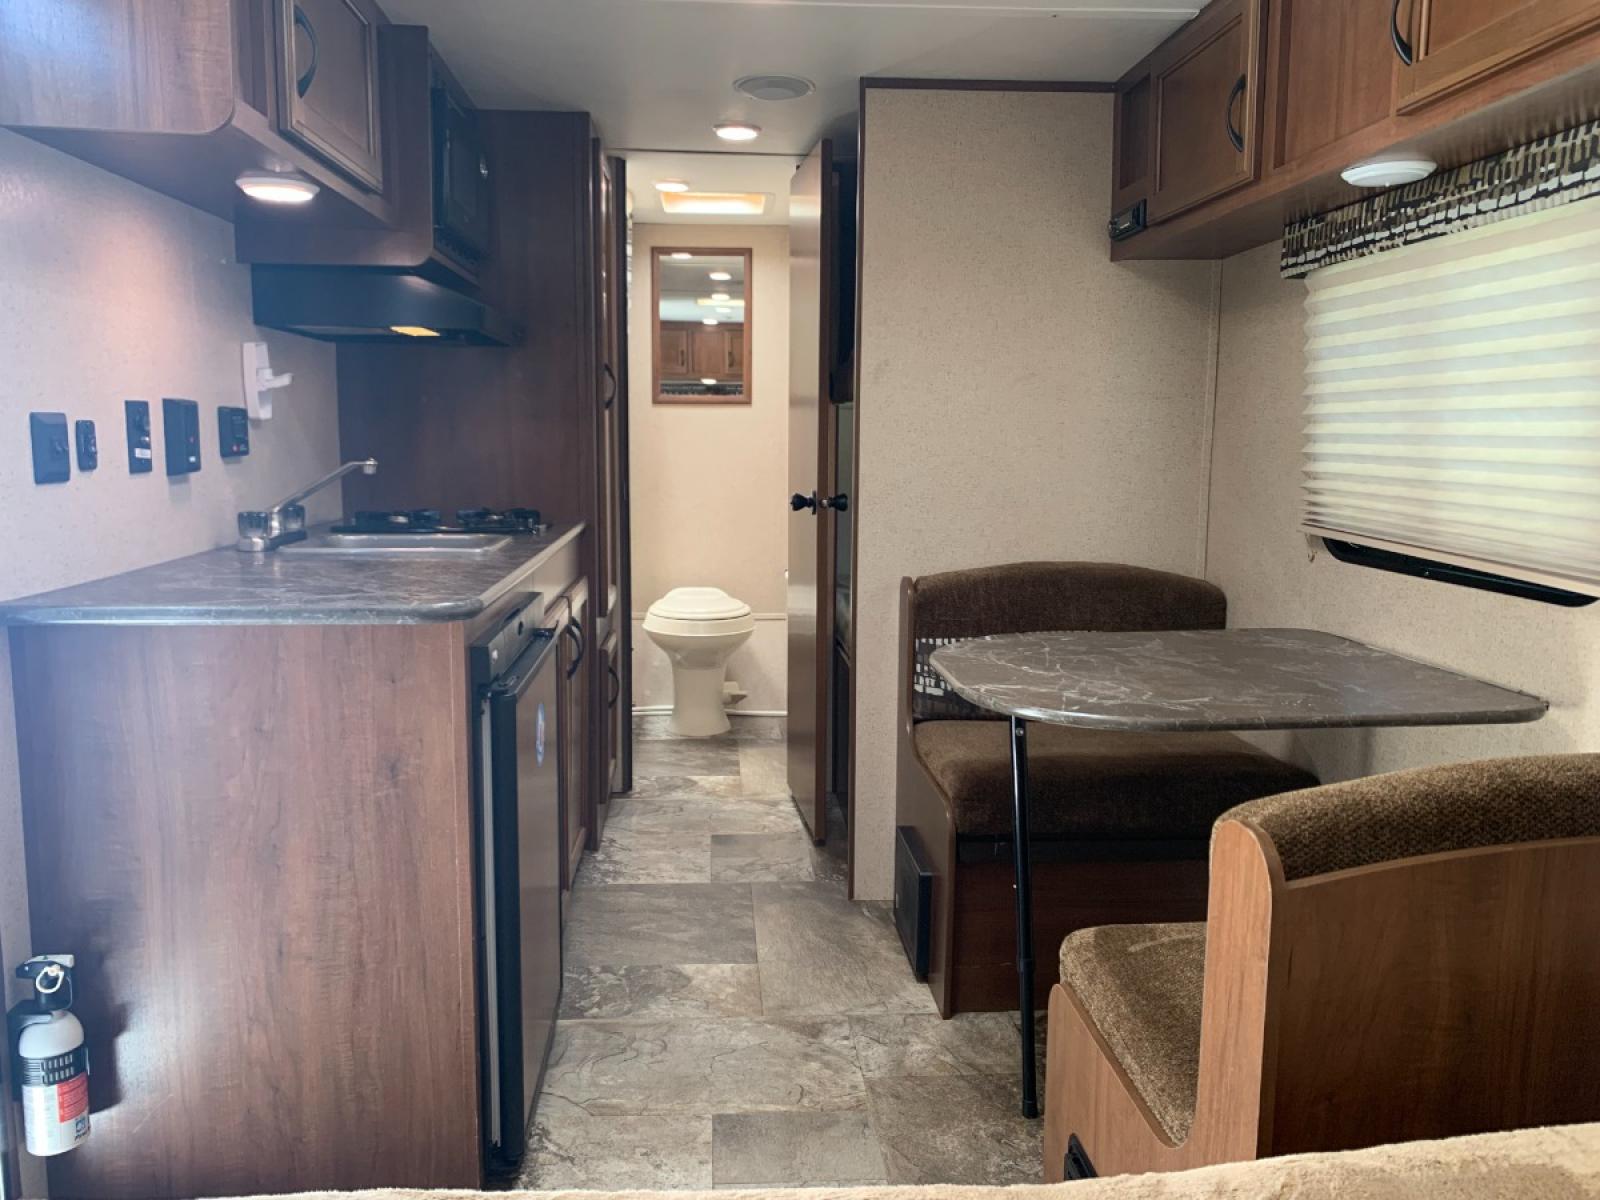 2016 TAN JAYCO Unknown 174BH (1UJBJ0AJ9G1) , located at 17760 Hwy 62, Morris, OK, 74445, 35.609104, -95.877060 - 2016 JAYCO JAY FLIGHT SLX 174BH IS 21.5FT LONG. THE OUTSIDE FEATURES A 10FT POWER AWNING, OUTSIDE STORAGE, OUTSIDE SPEAKERS, SINGLE AXLE, REAR MANUAL LEVELING JACKS, AND SPARE TIRE. AS YOU ENTER THE CAMPER, YOU WILL NOTICE THAT THERE ARE 5 WINDOWS SO YOU CAN LET NATURAL SUNLIGHT IN, THE QUEEN BE - Photo #20